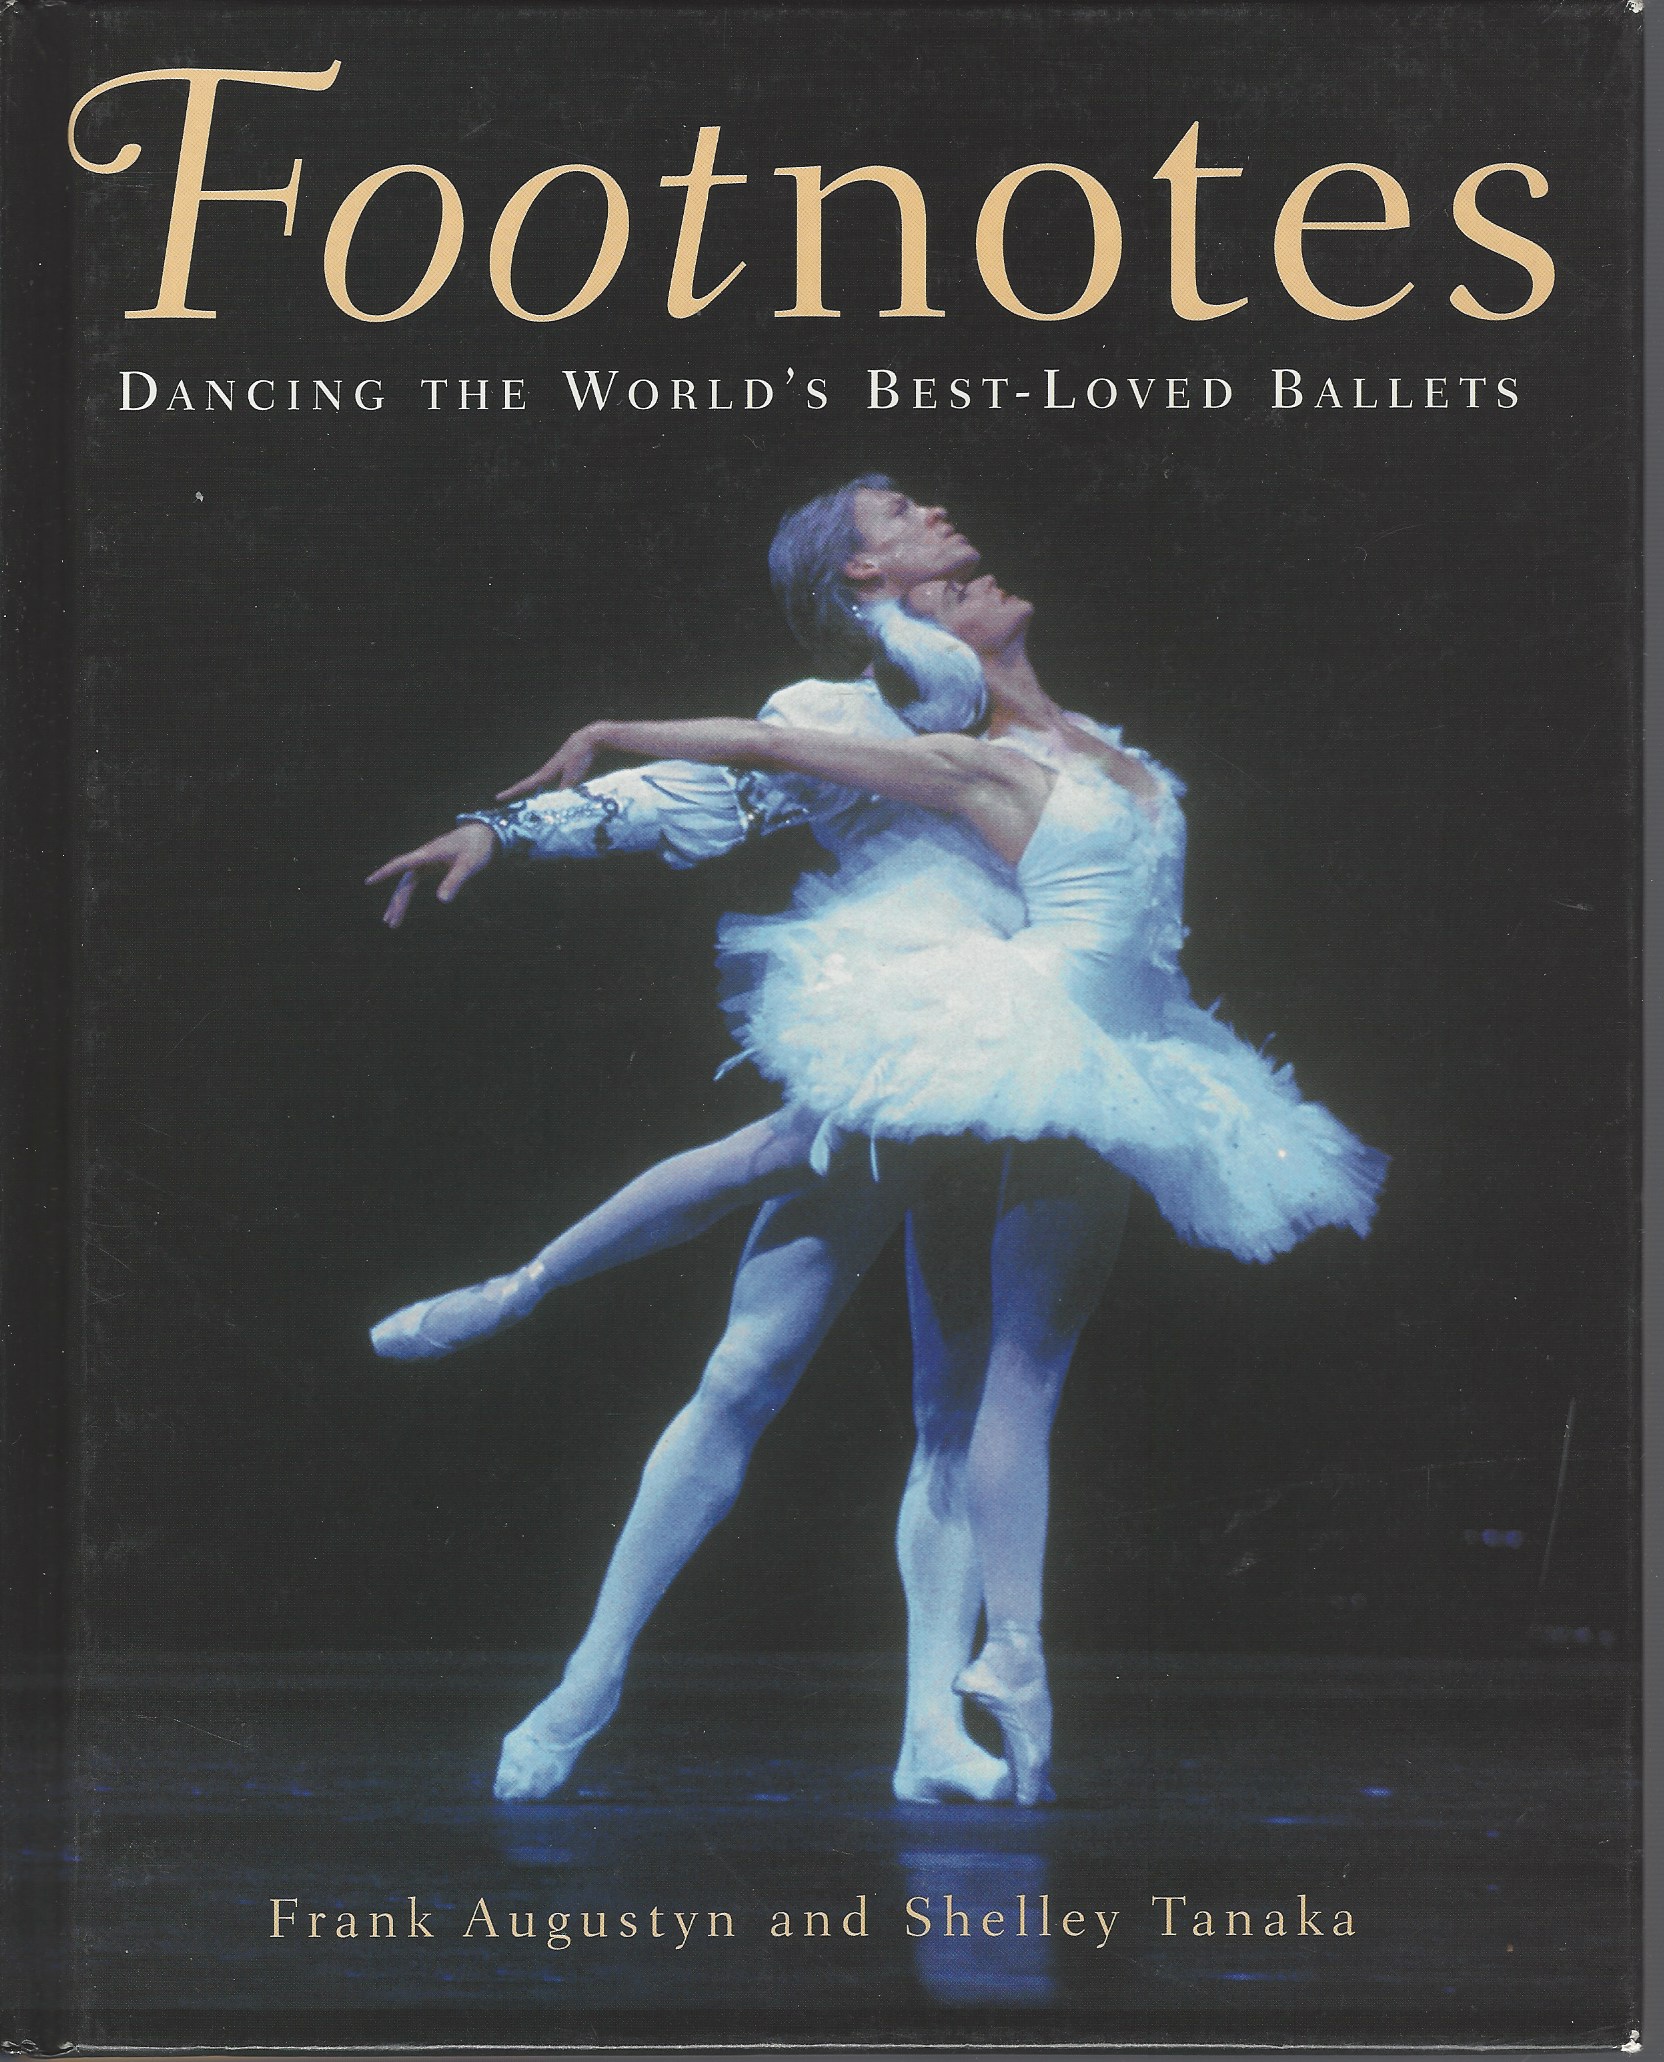 AUGUSTYN FRANK & TANAKA SHELLY - Footnotes: Dancing the World's Best-Loved Balllets